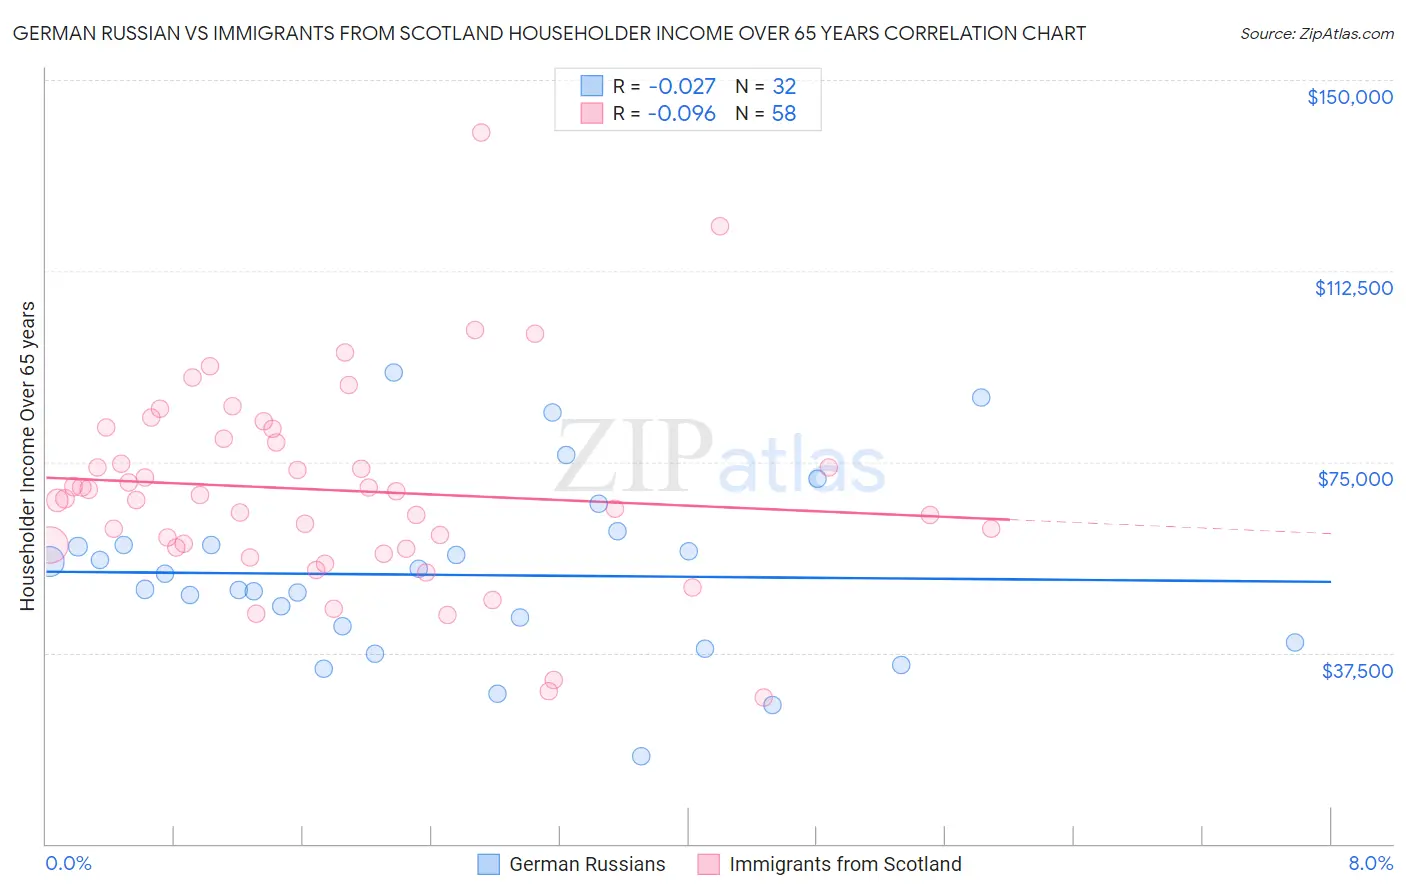 German Russian vs Immigrants from Scotland Householder Income Over 65 years